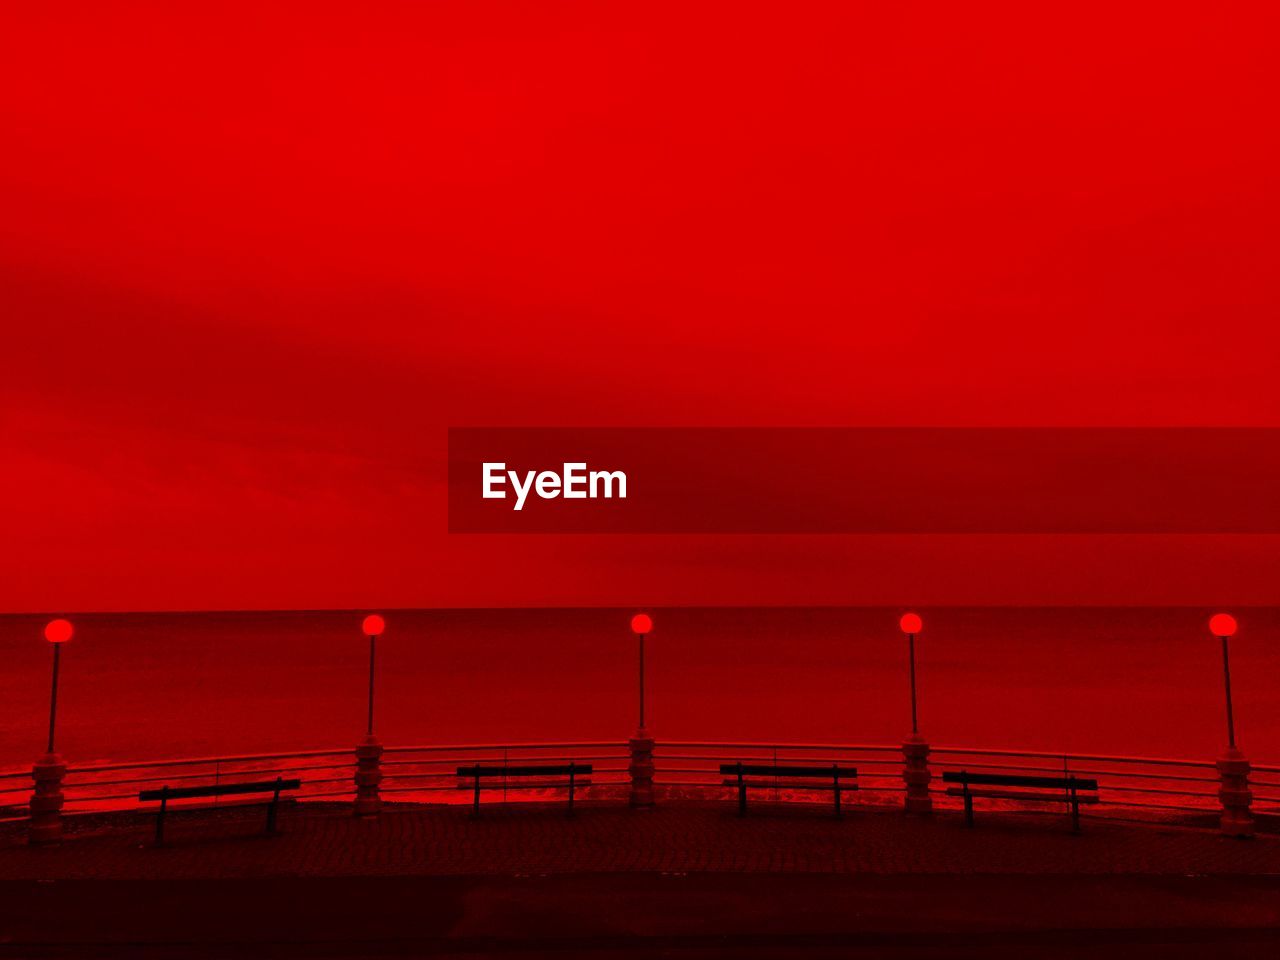 By the sea, evening light, red vision, horizon over the sea and street lamps 